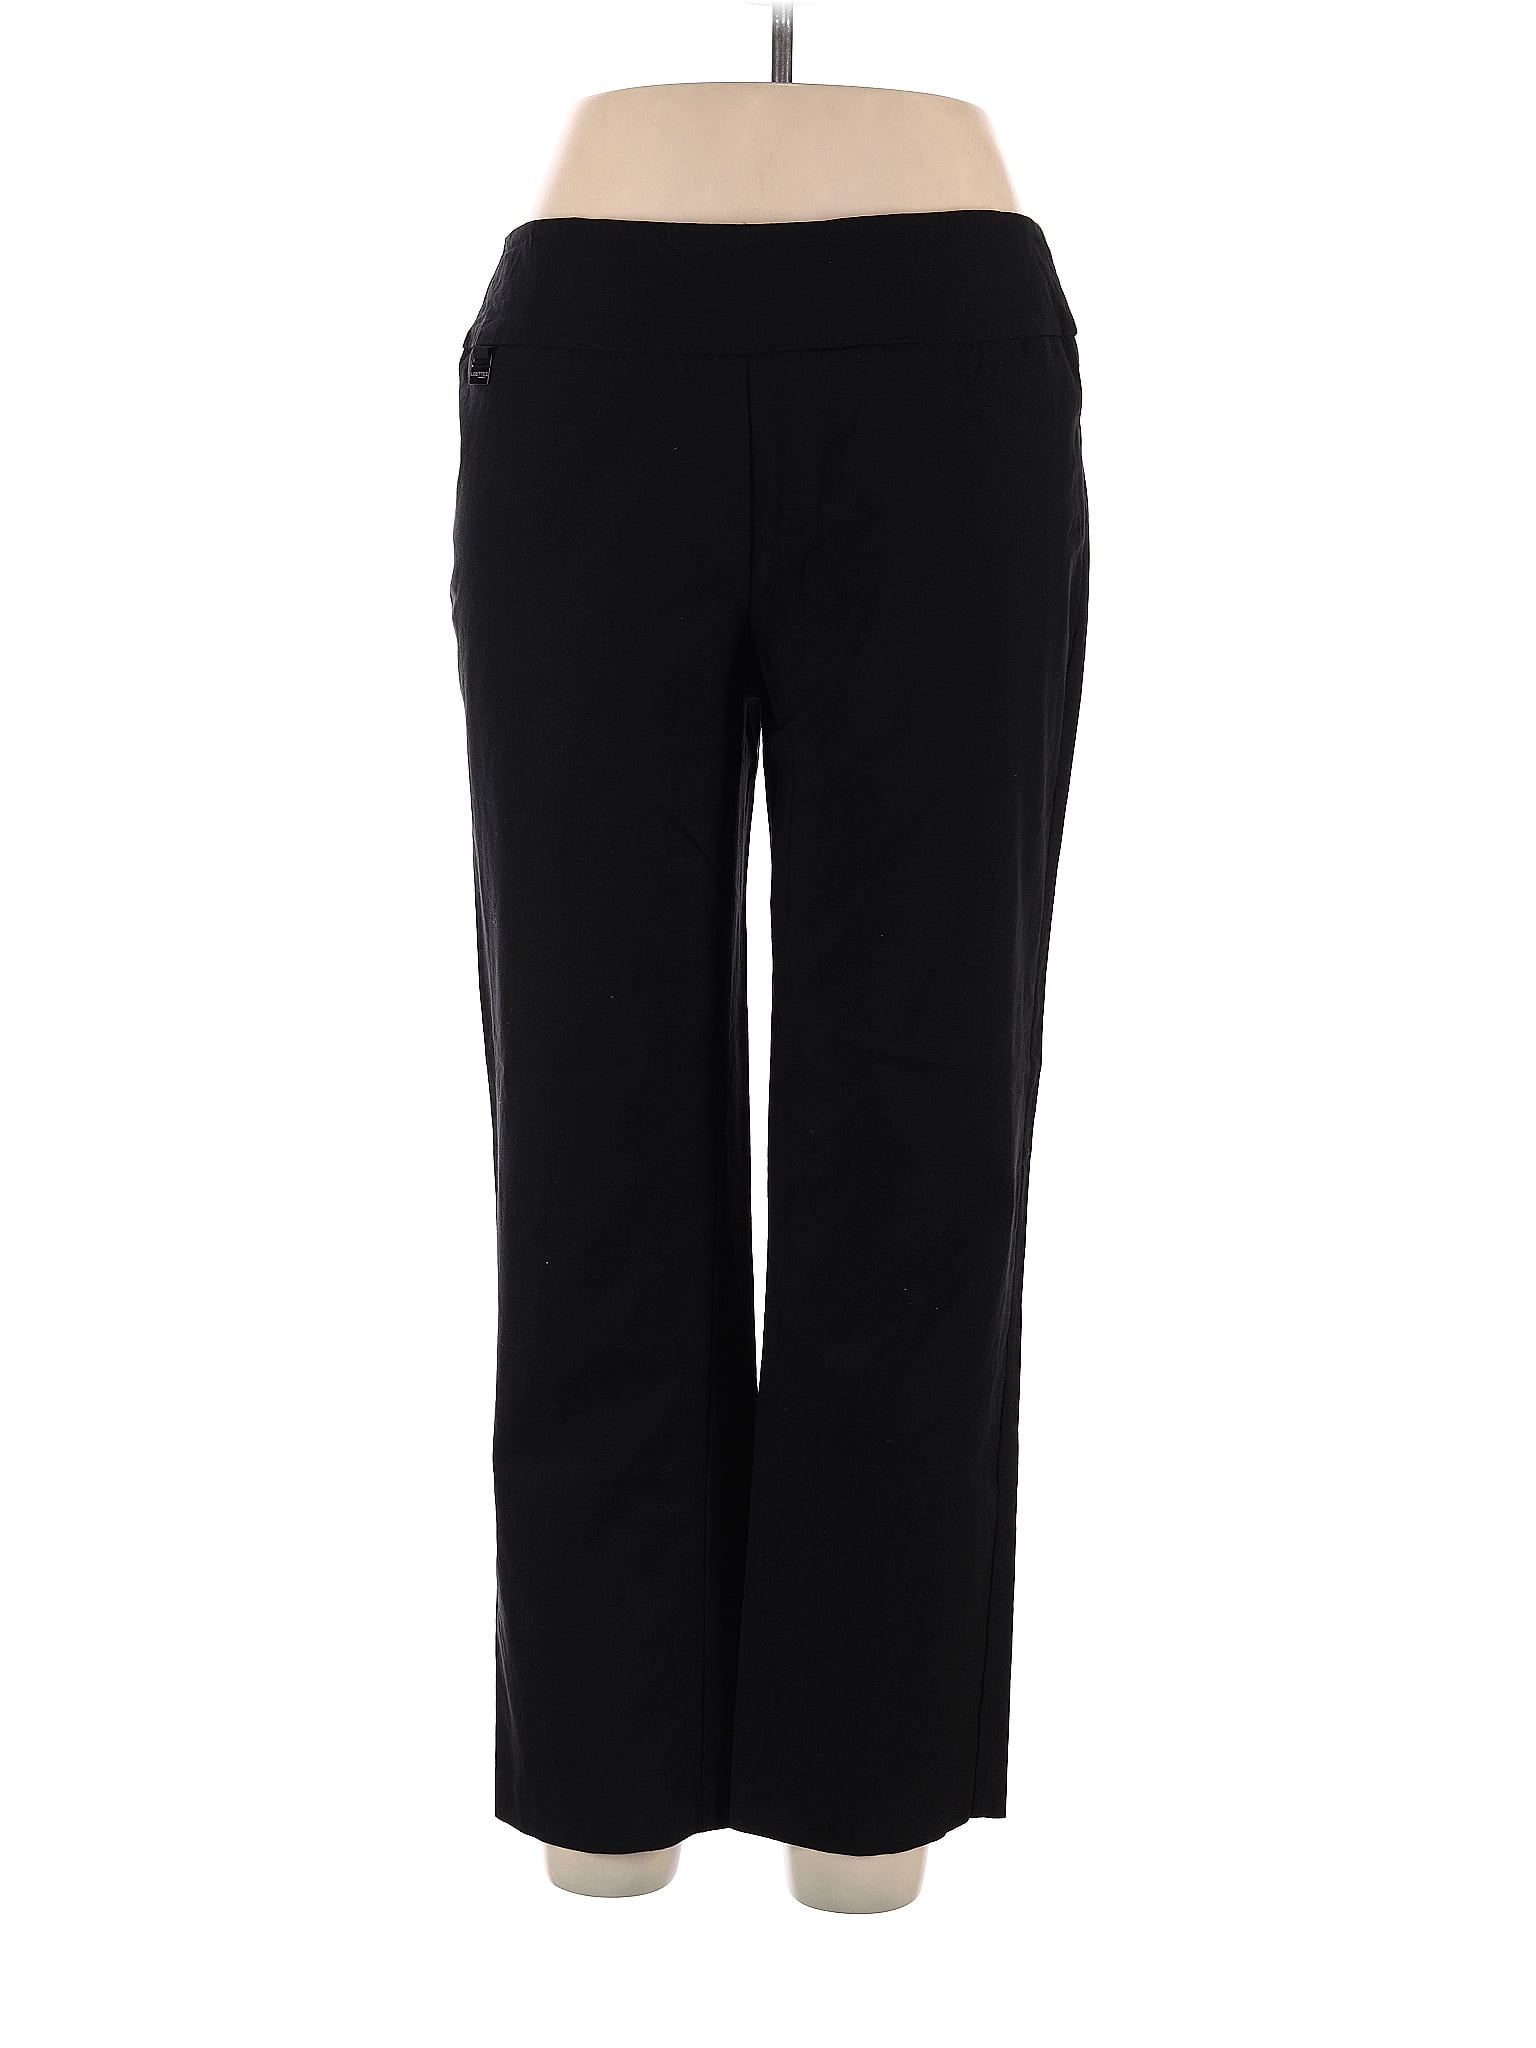 Christian Siriano Black Casual Pants for Women